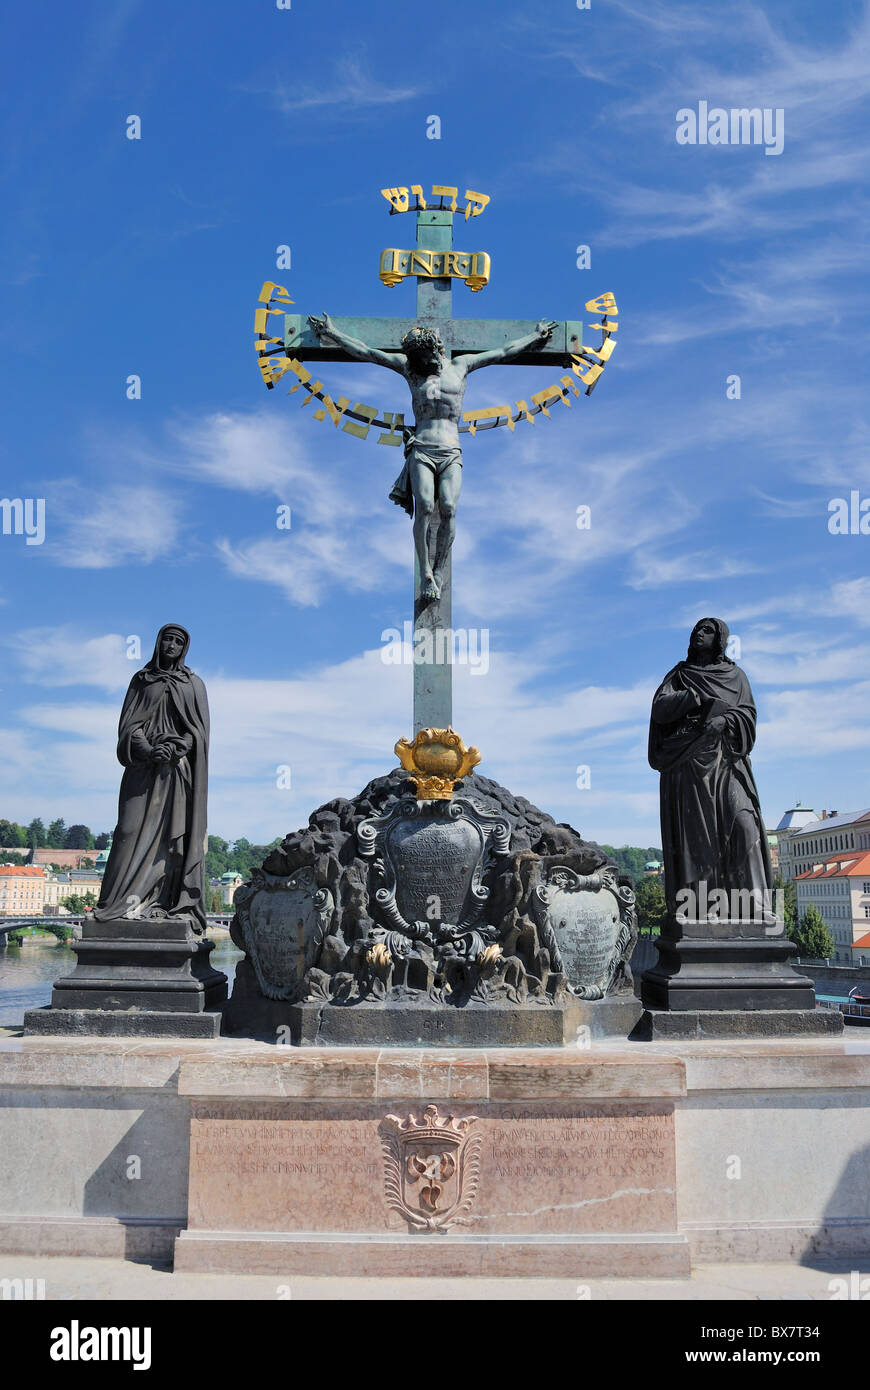 The Crucifix and Calvary, one of several medieval statues on Charles Bridge in Prague, Czech Republic. Stock Photo